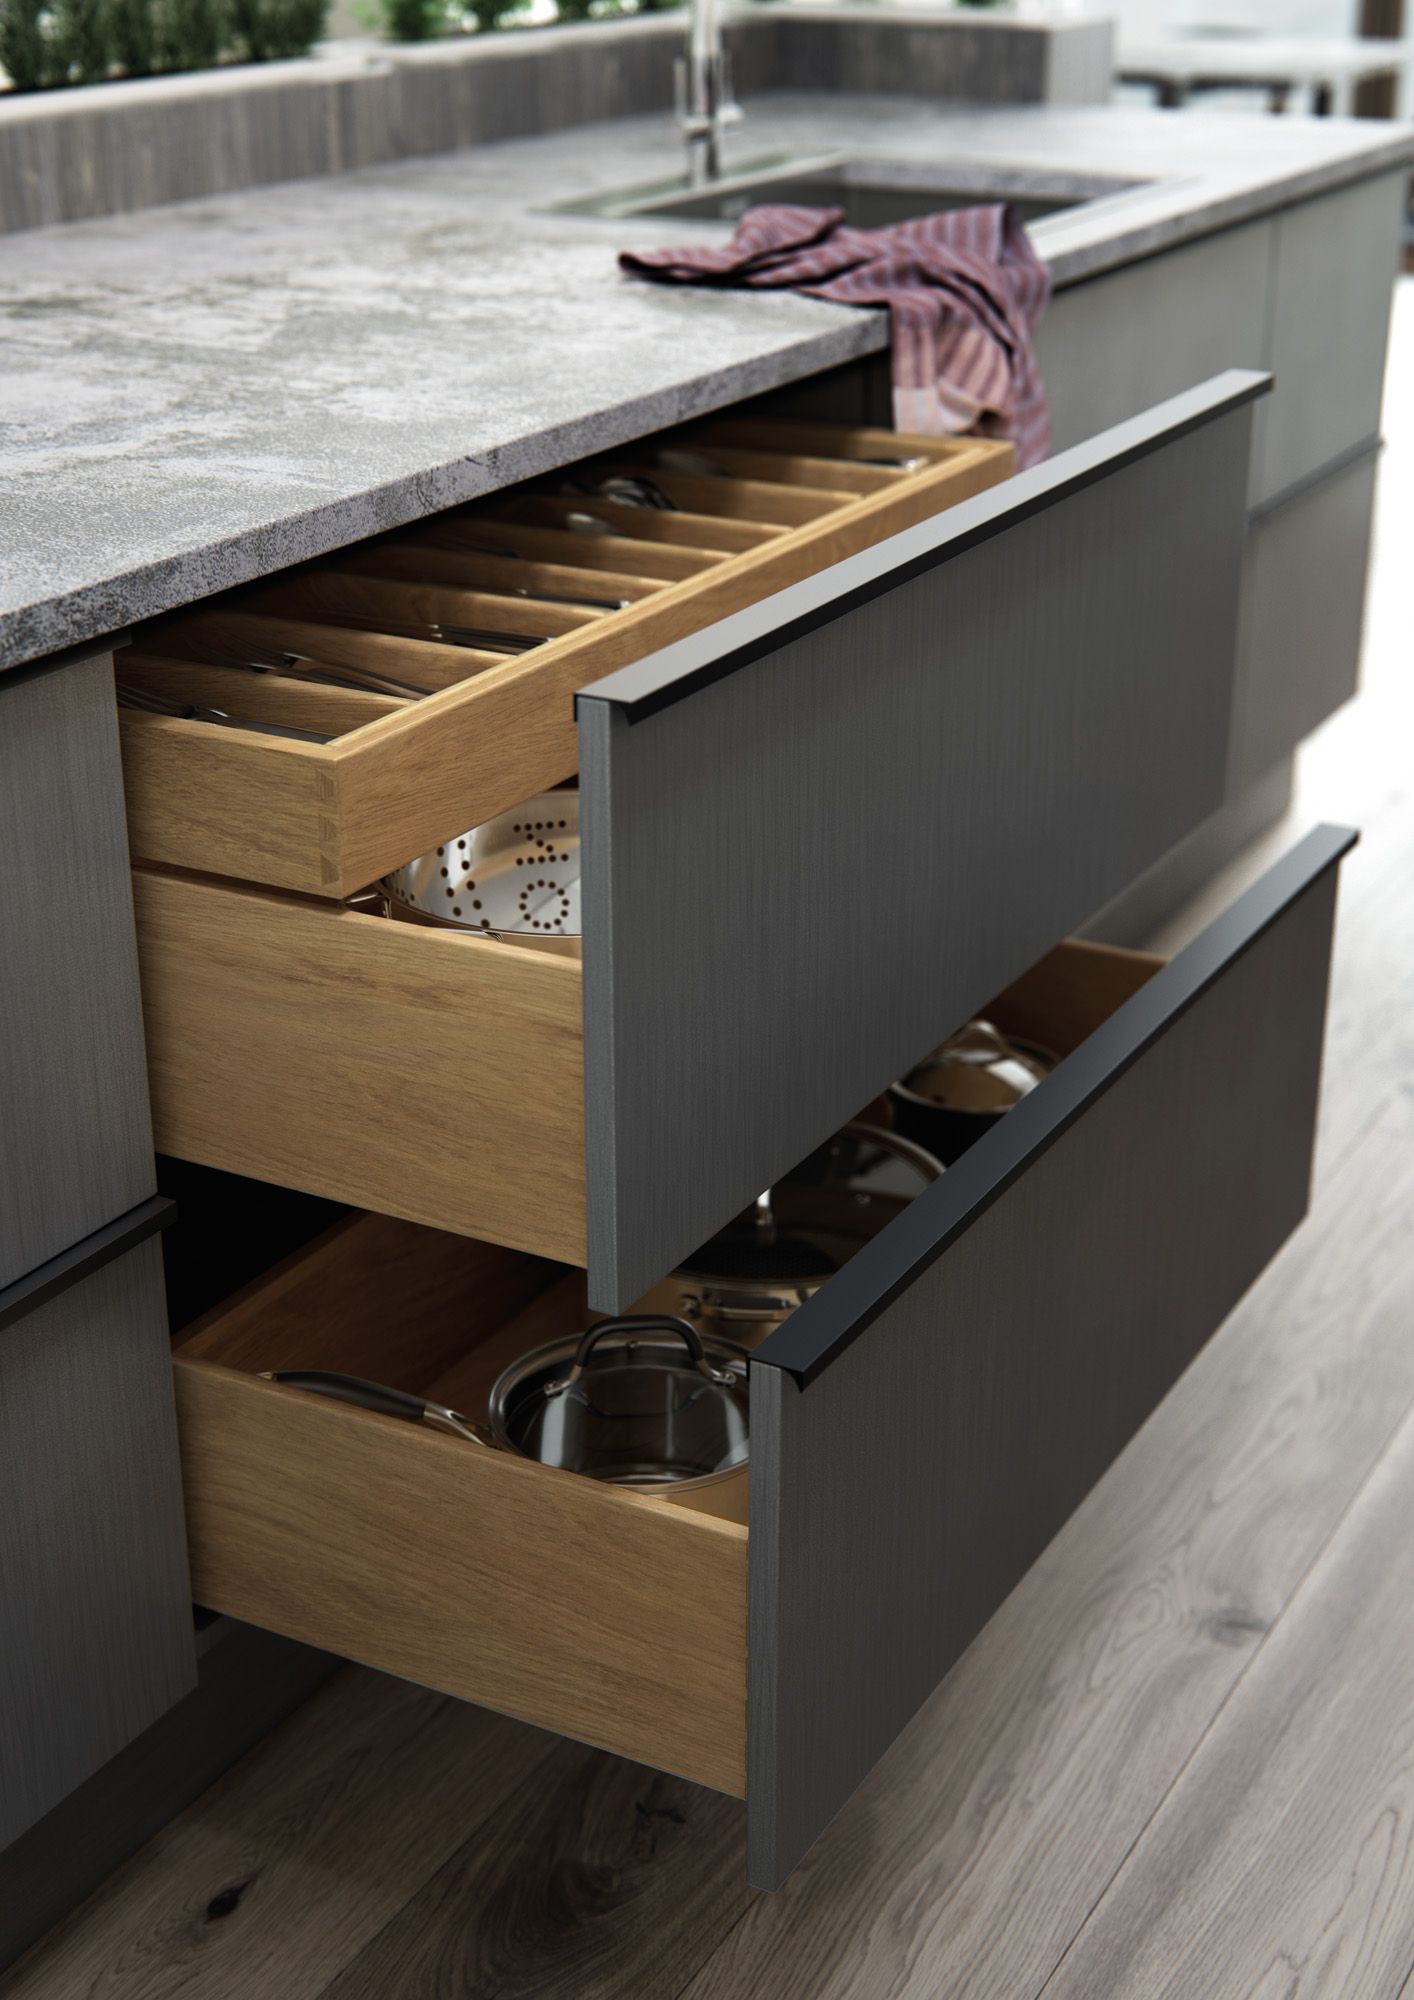 Organized Spaces: Enhance Your Kitchen with Kitchen Drawers